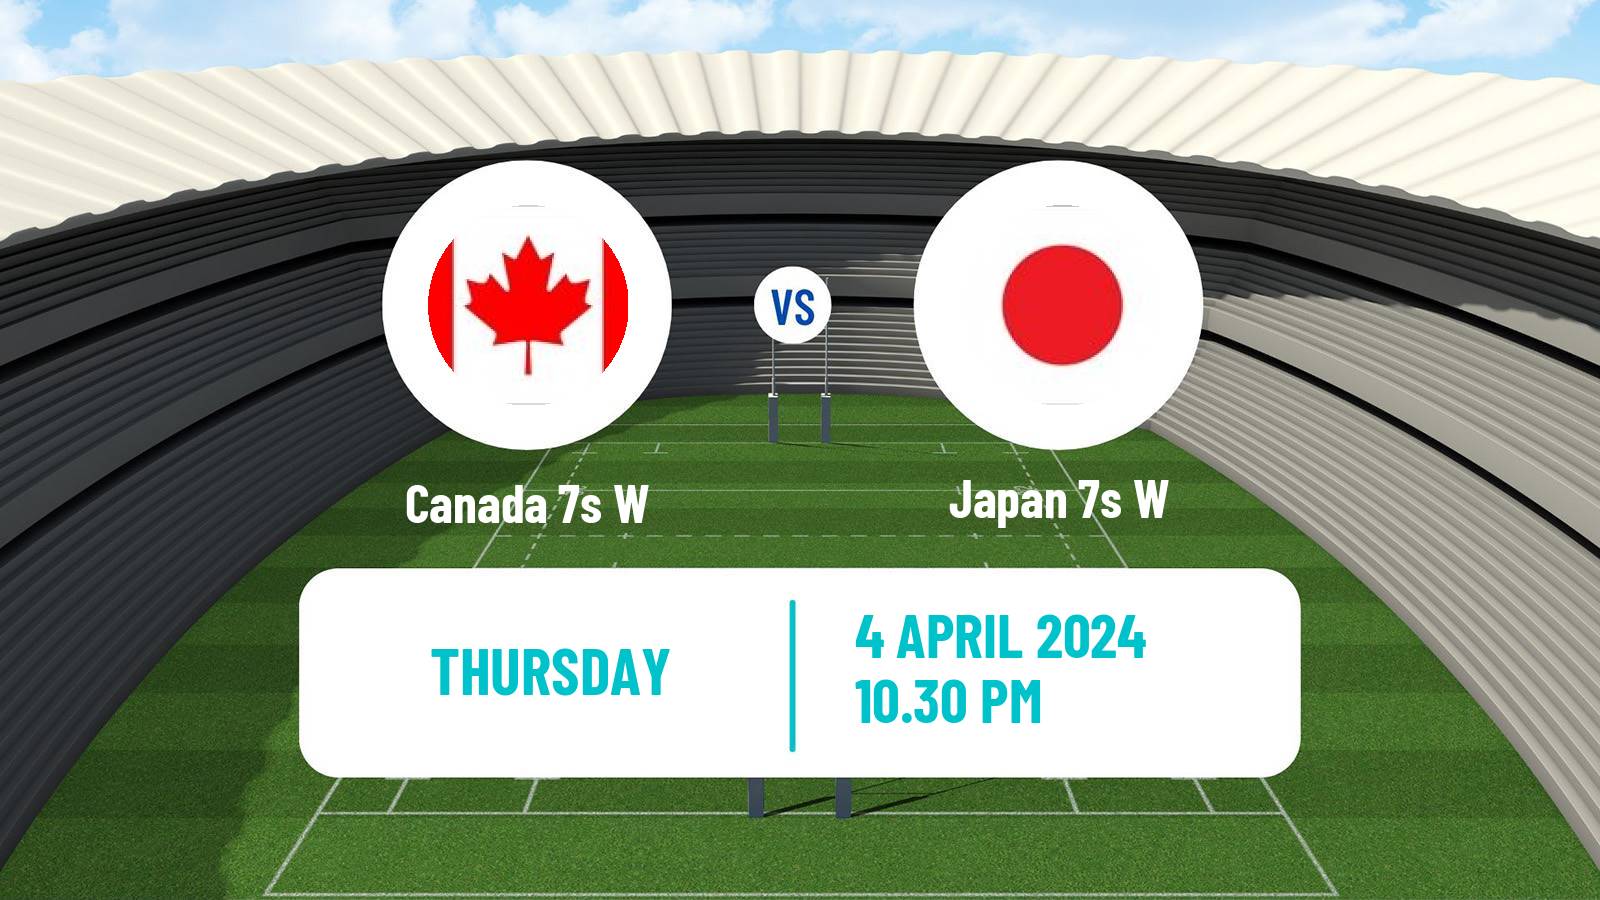 Rugby union Sevens World Series Women - Hong Kong Canada 7s W - Japan 7s W